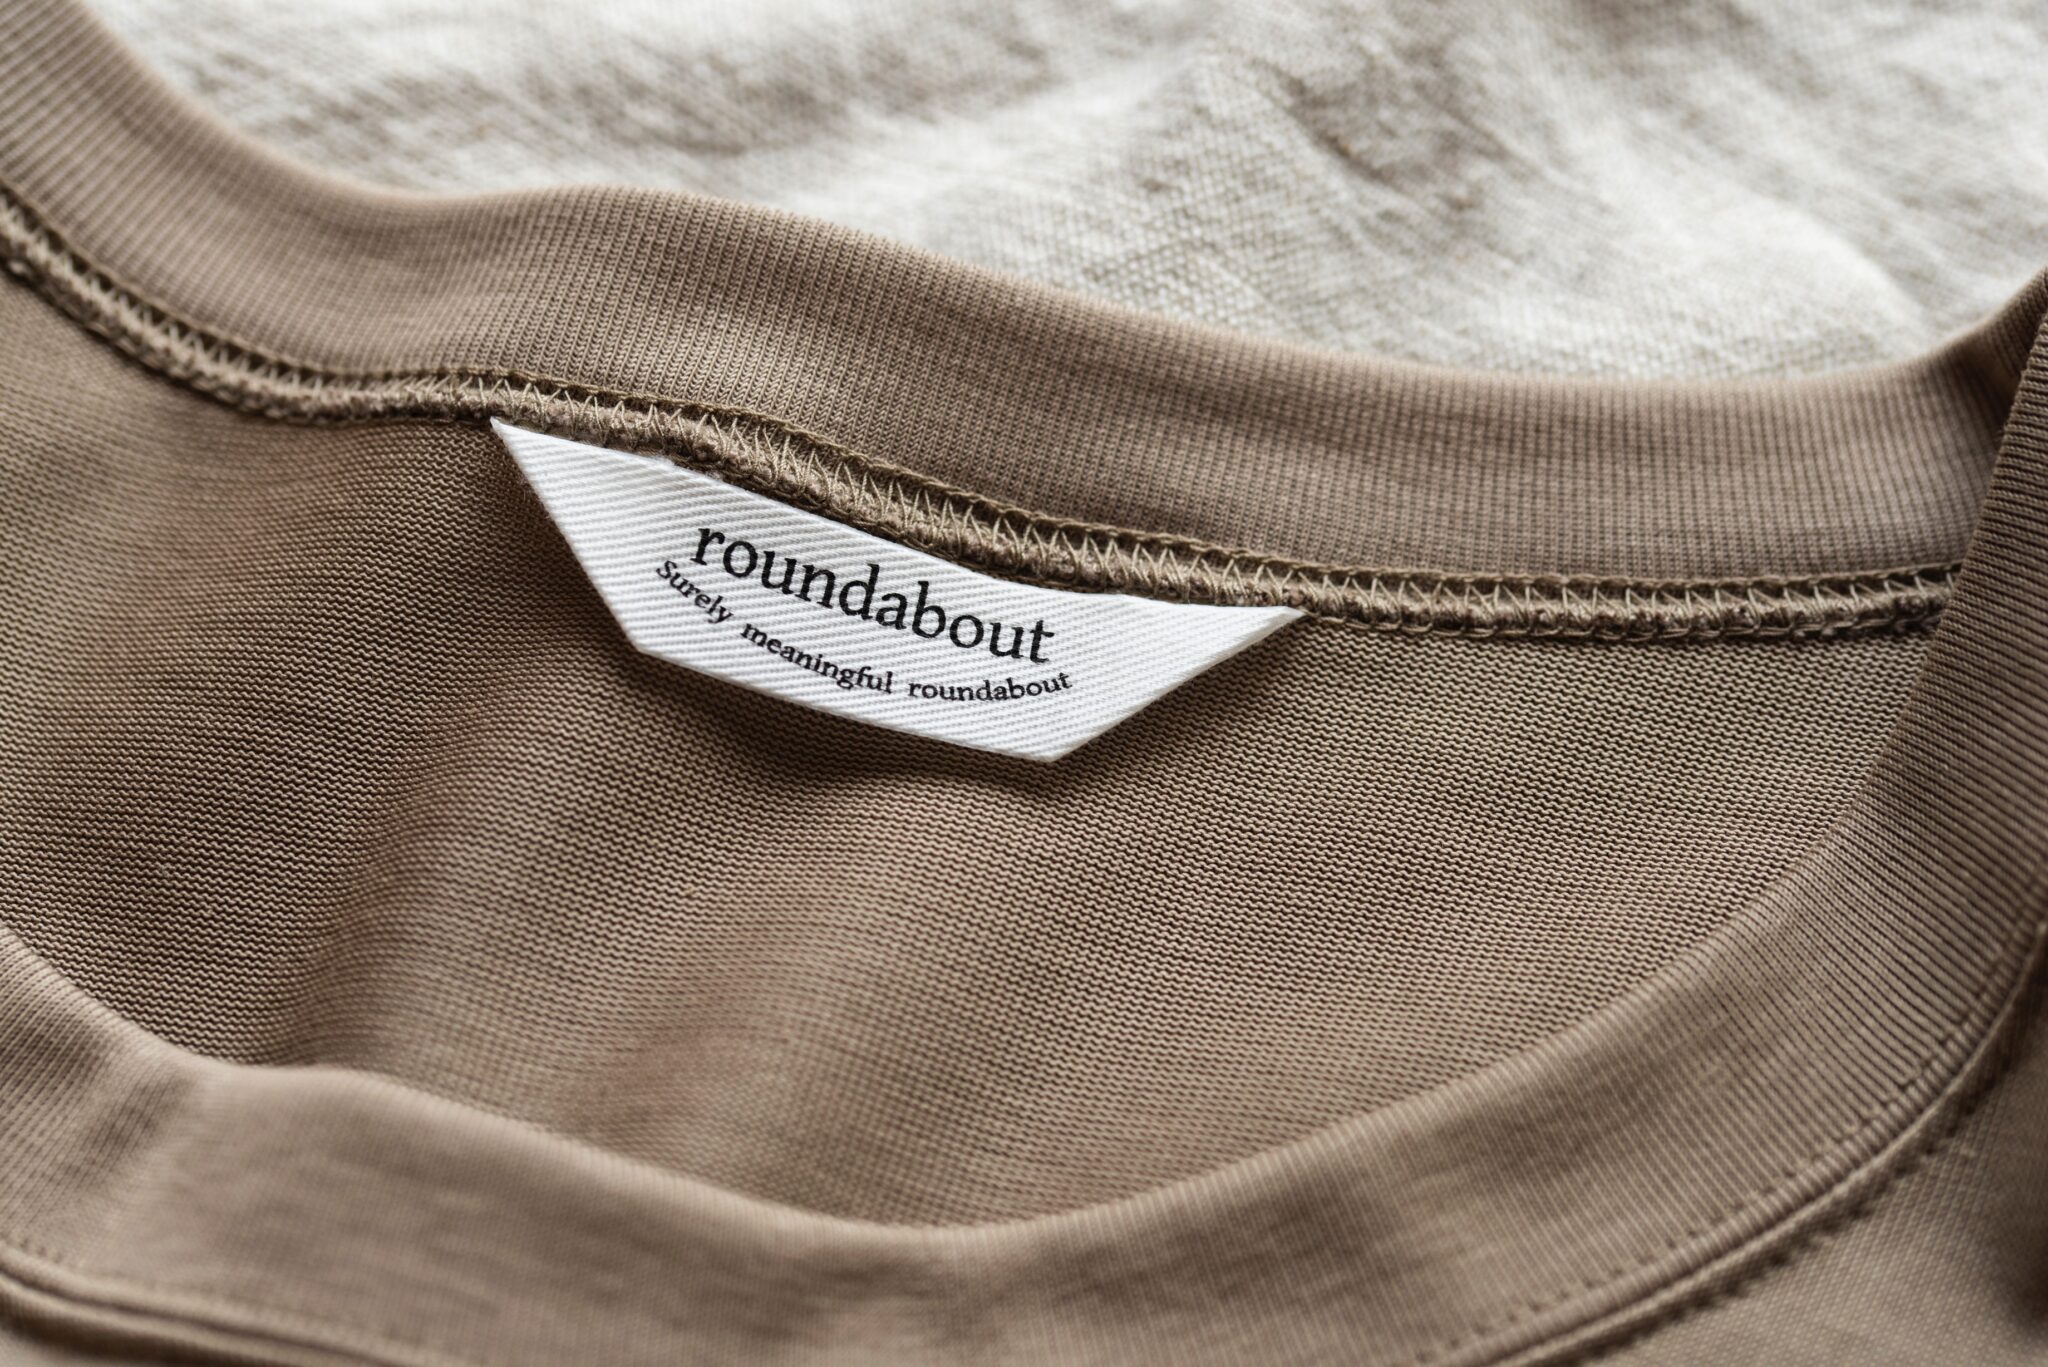 Photo: brand name tag of roundabout